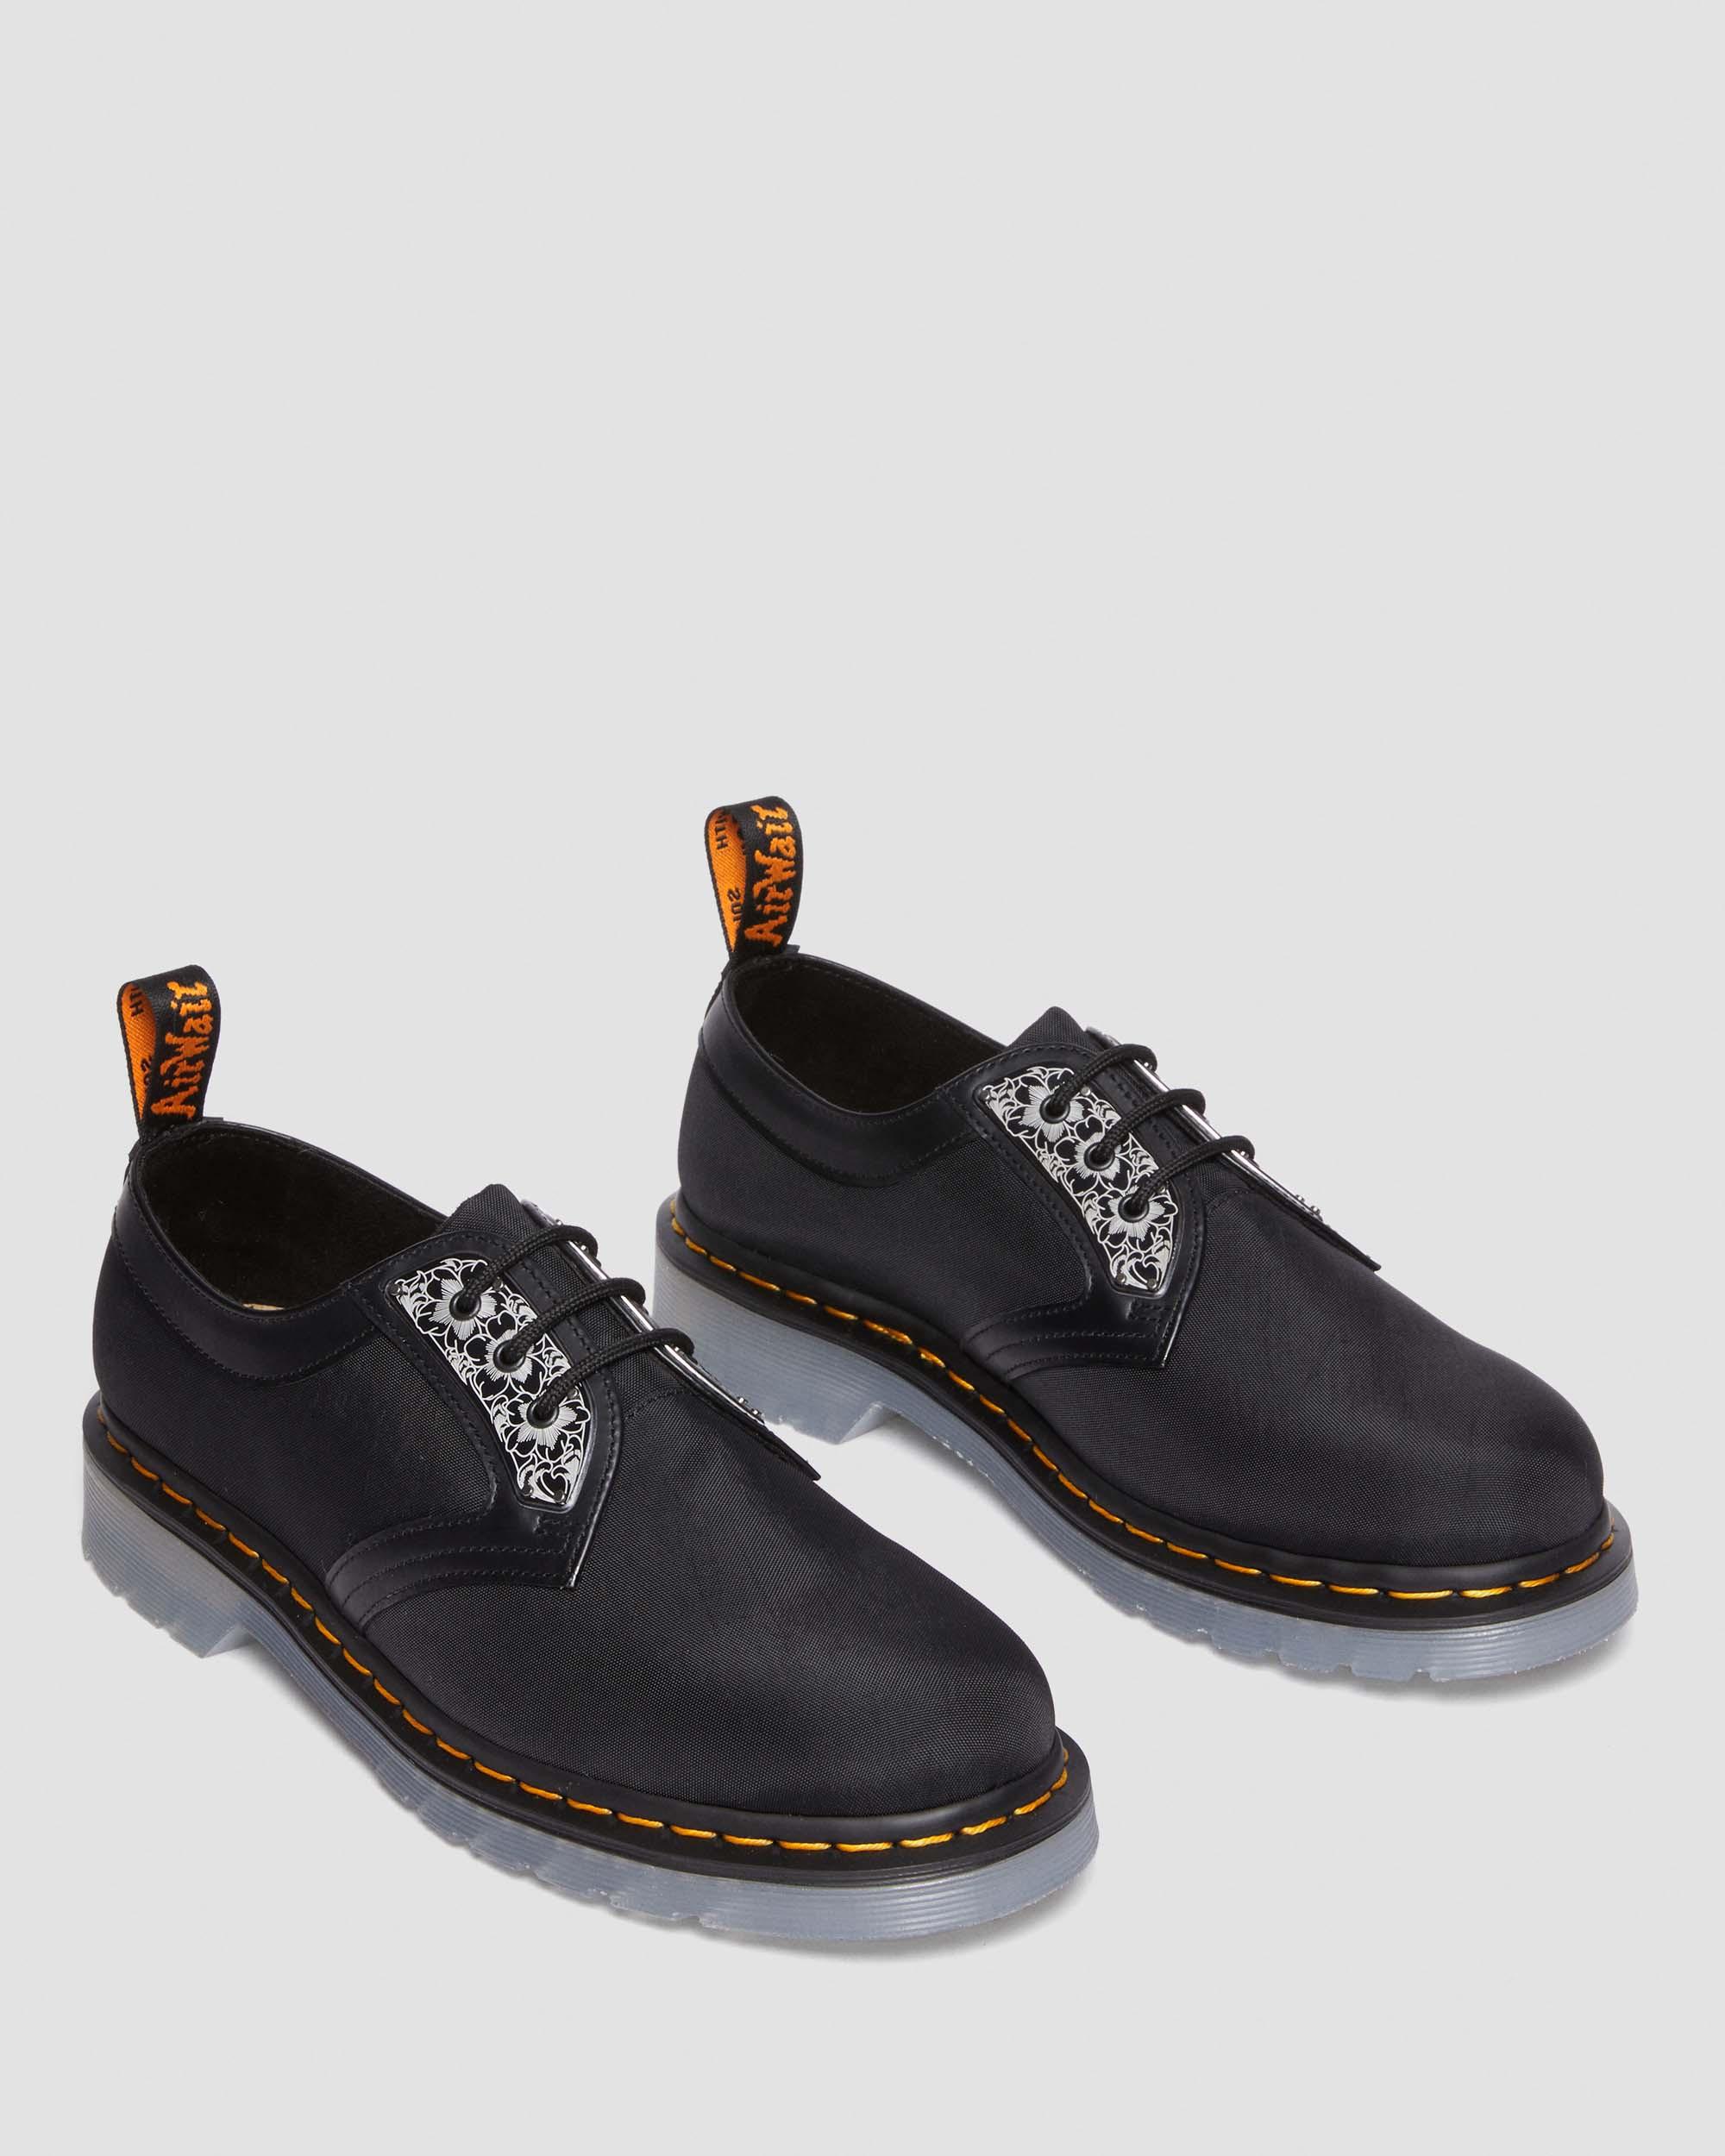 1461 King Nerd Leather Shoes in Black